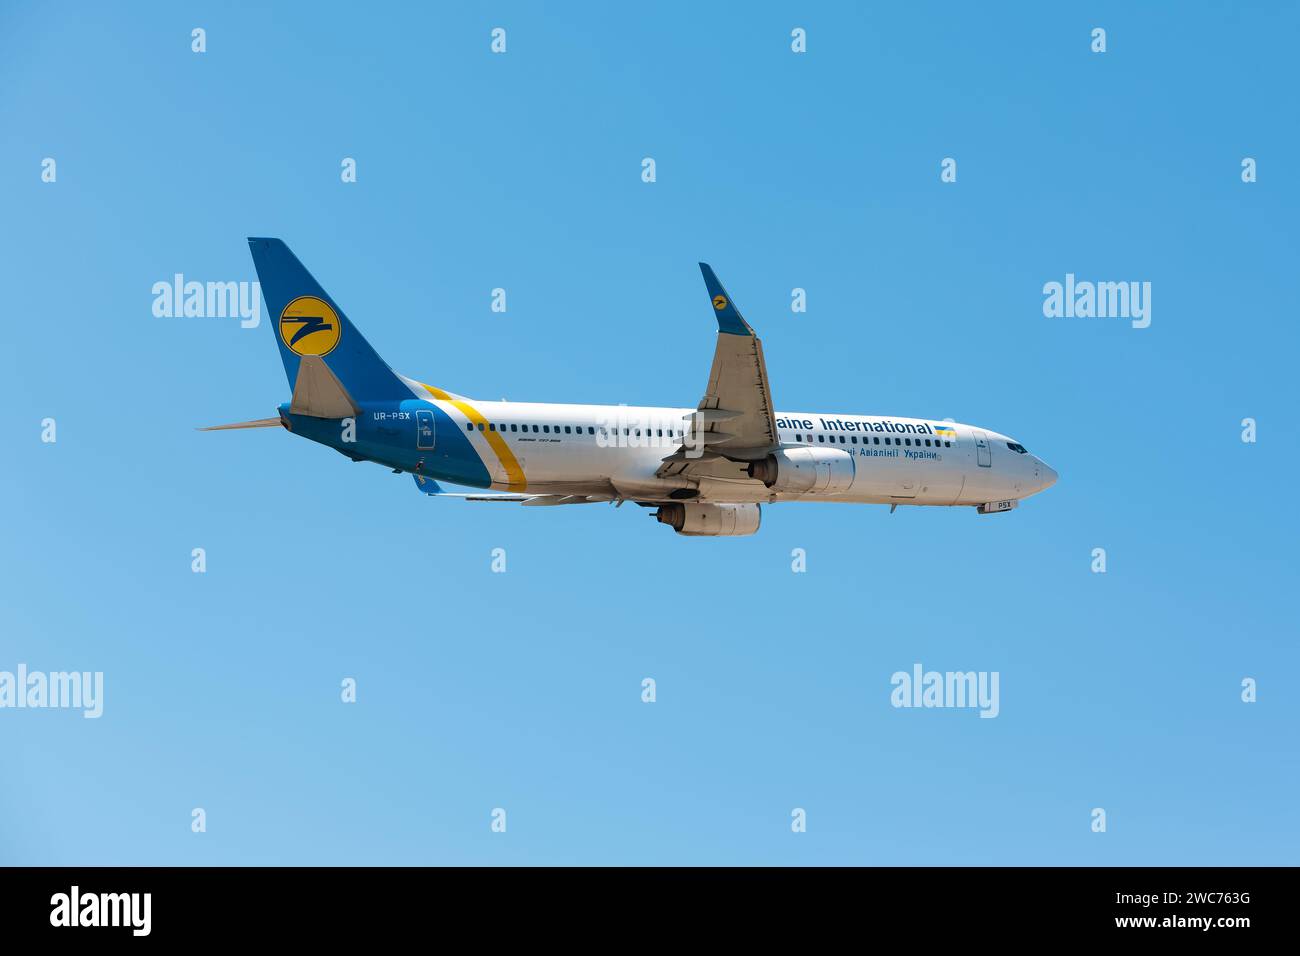 Boryspil, Ukraine - August 24, 2019: Airplane Boeing 737-800 (UR-PSX) of Ukraine International Airlines (FlyUIA) is taking-off from Boryspil Airport Stock Photo